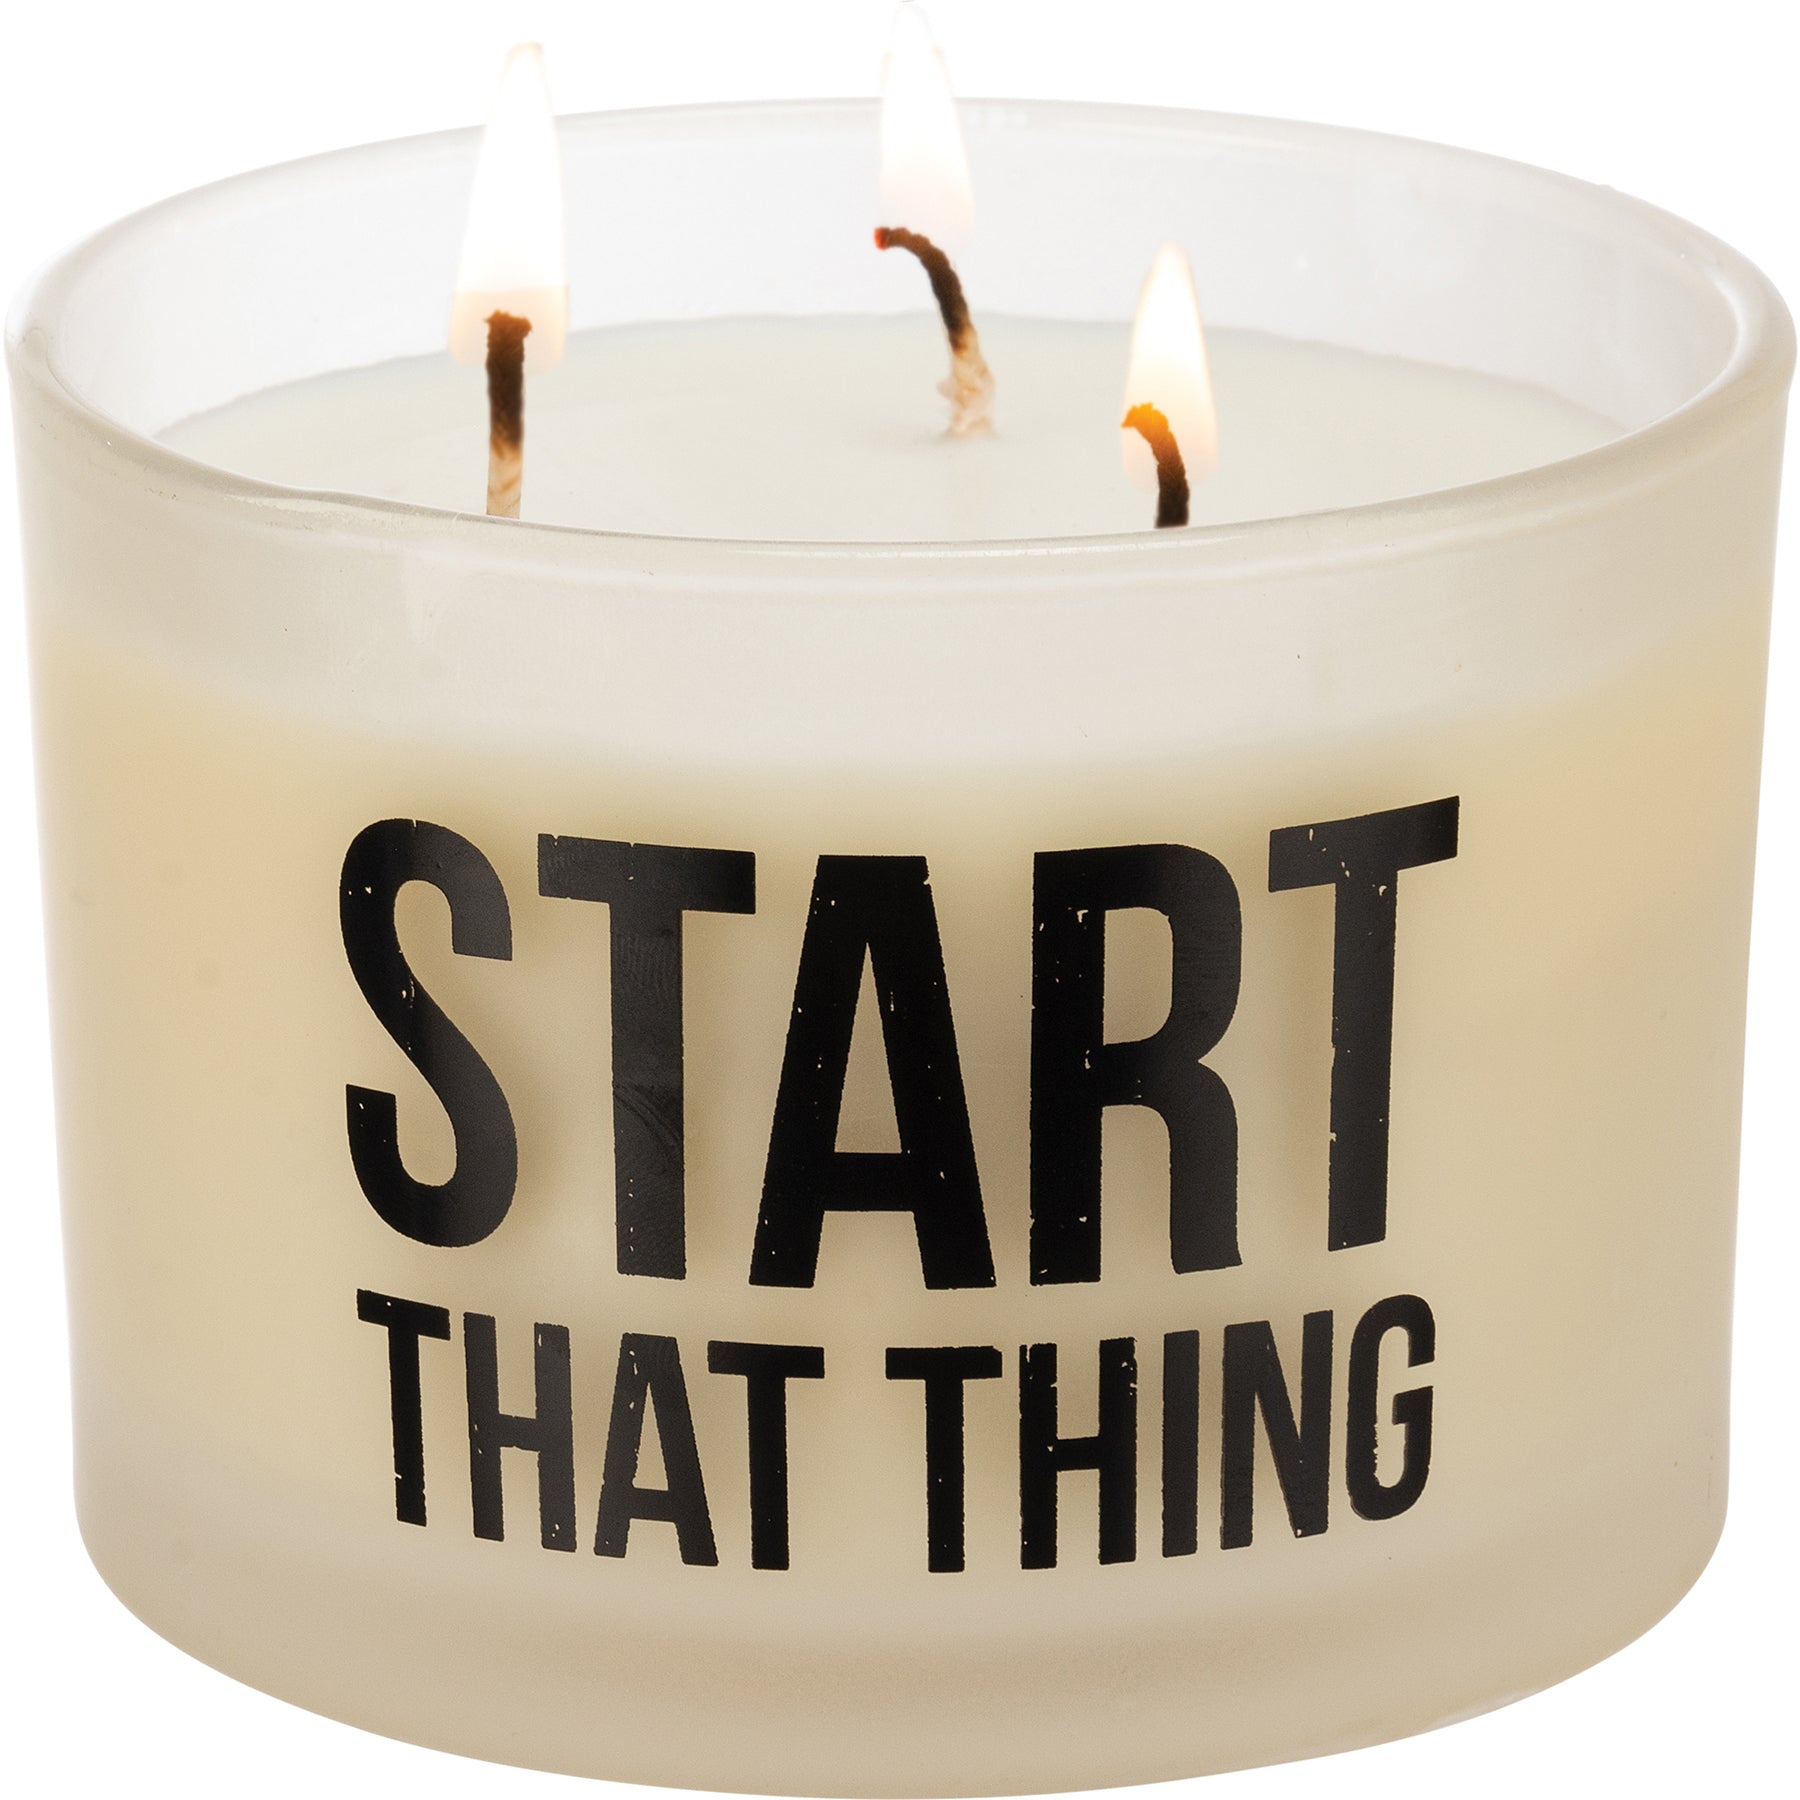 Start That Thing Candle | Bergamot Scent Jar Candle | 14oz